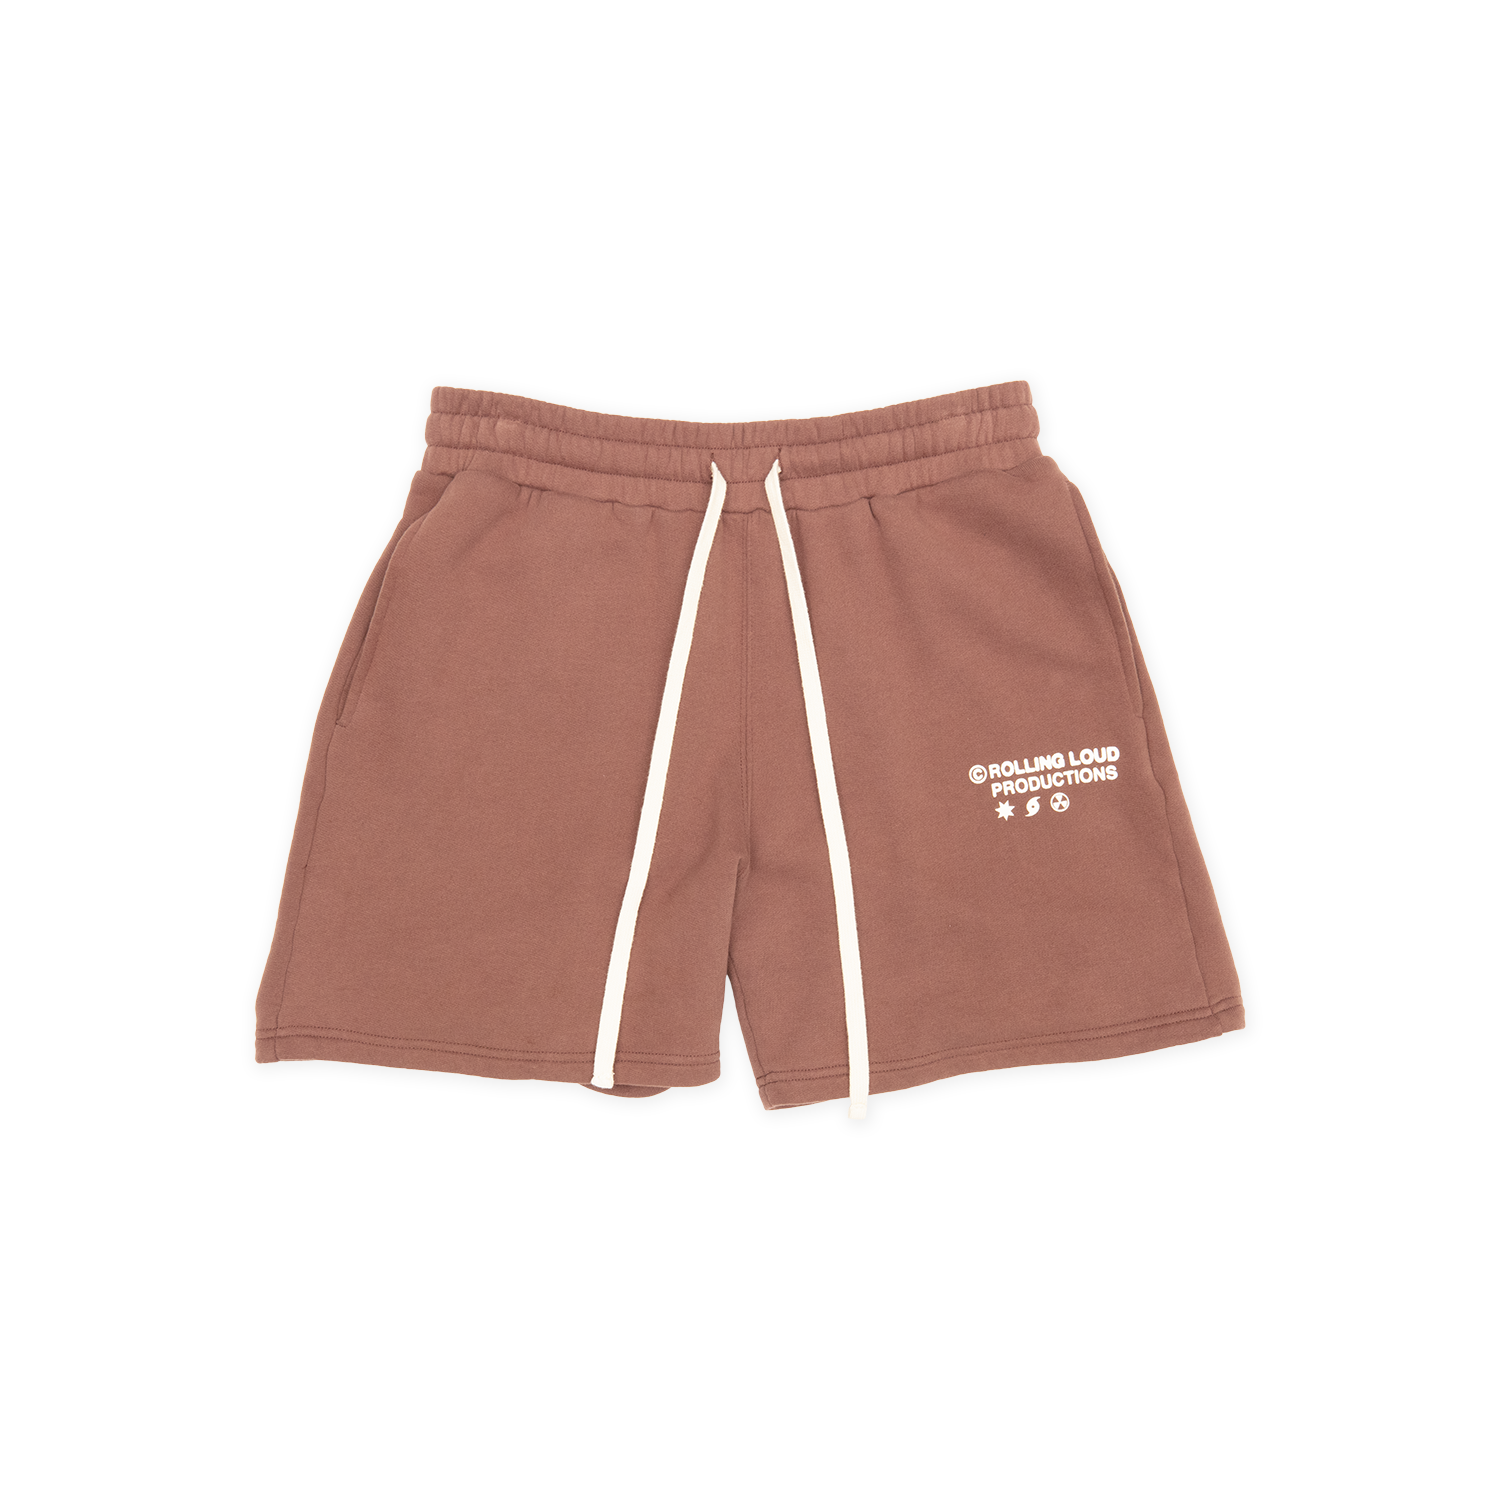 RL Productions Premium Terry Shorts Brown